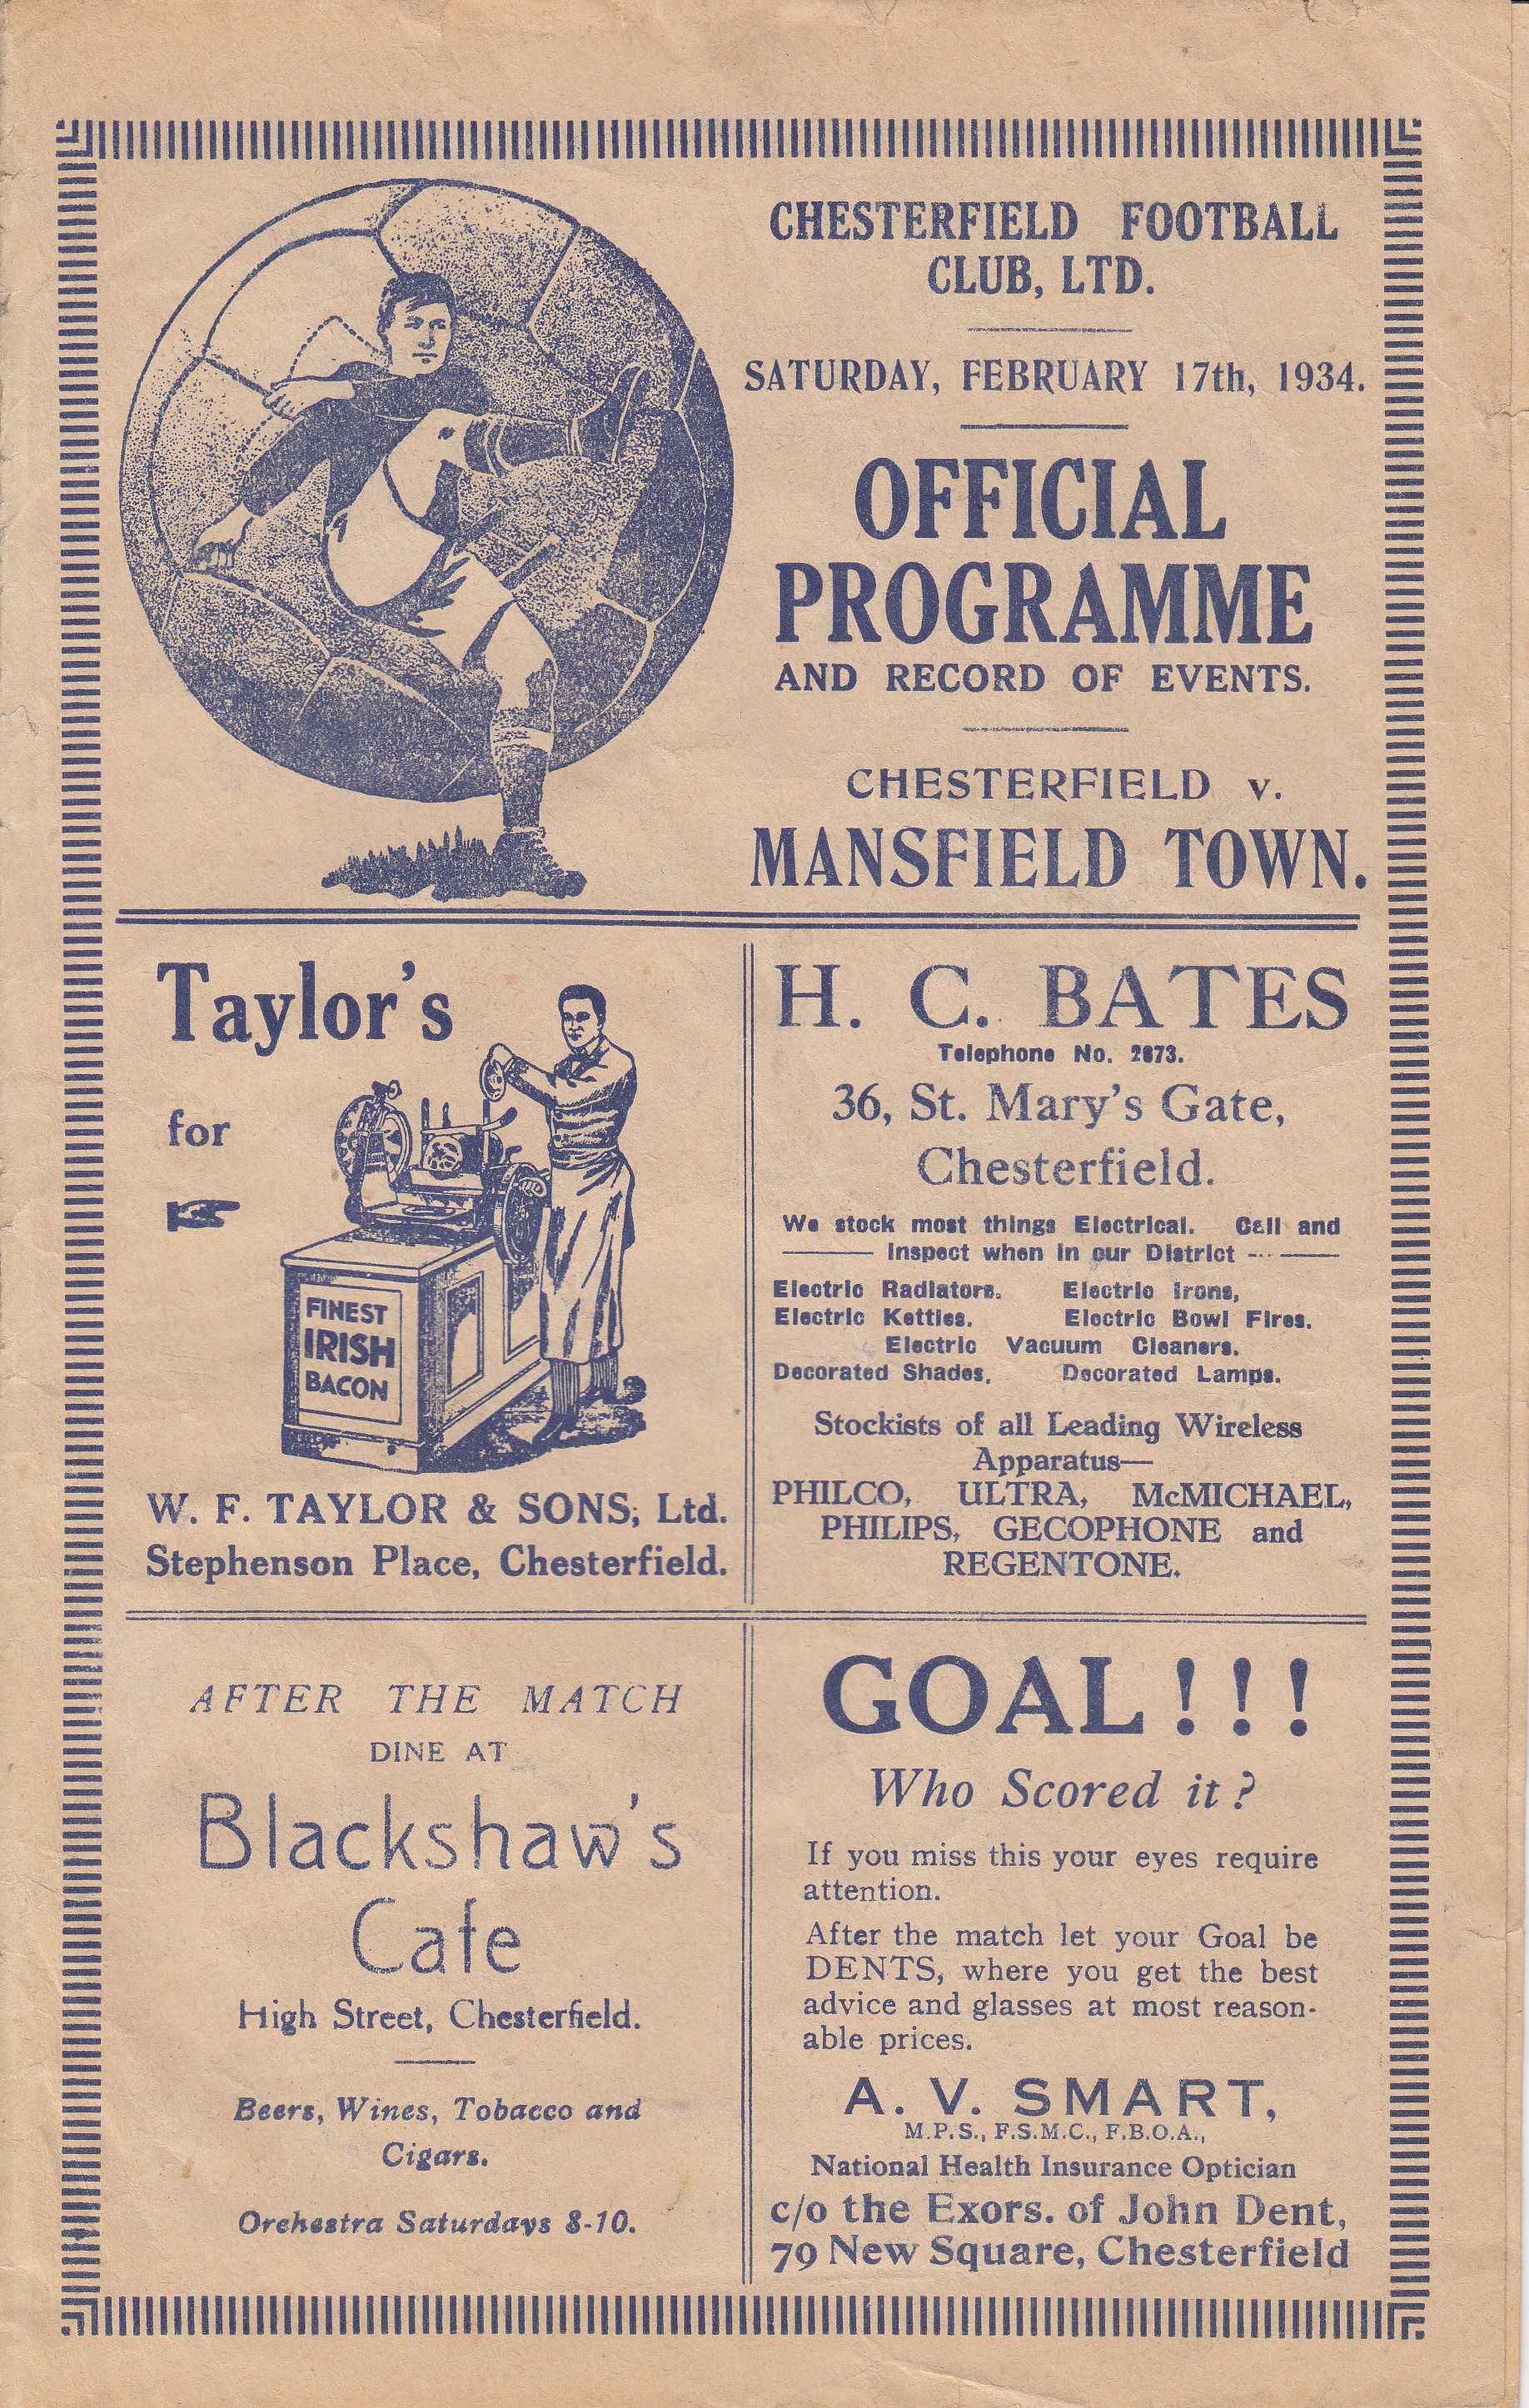 CHESTERFIELD - MANSFIELD 1934 Chesterfield home programme v Mansfield, 17/2/1934, Chesterfield